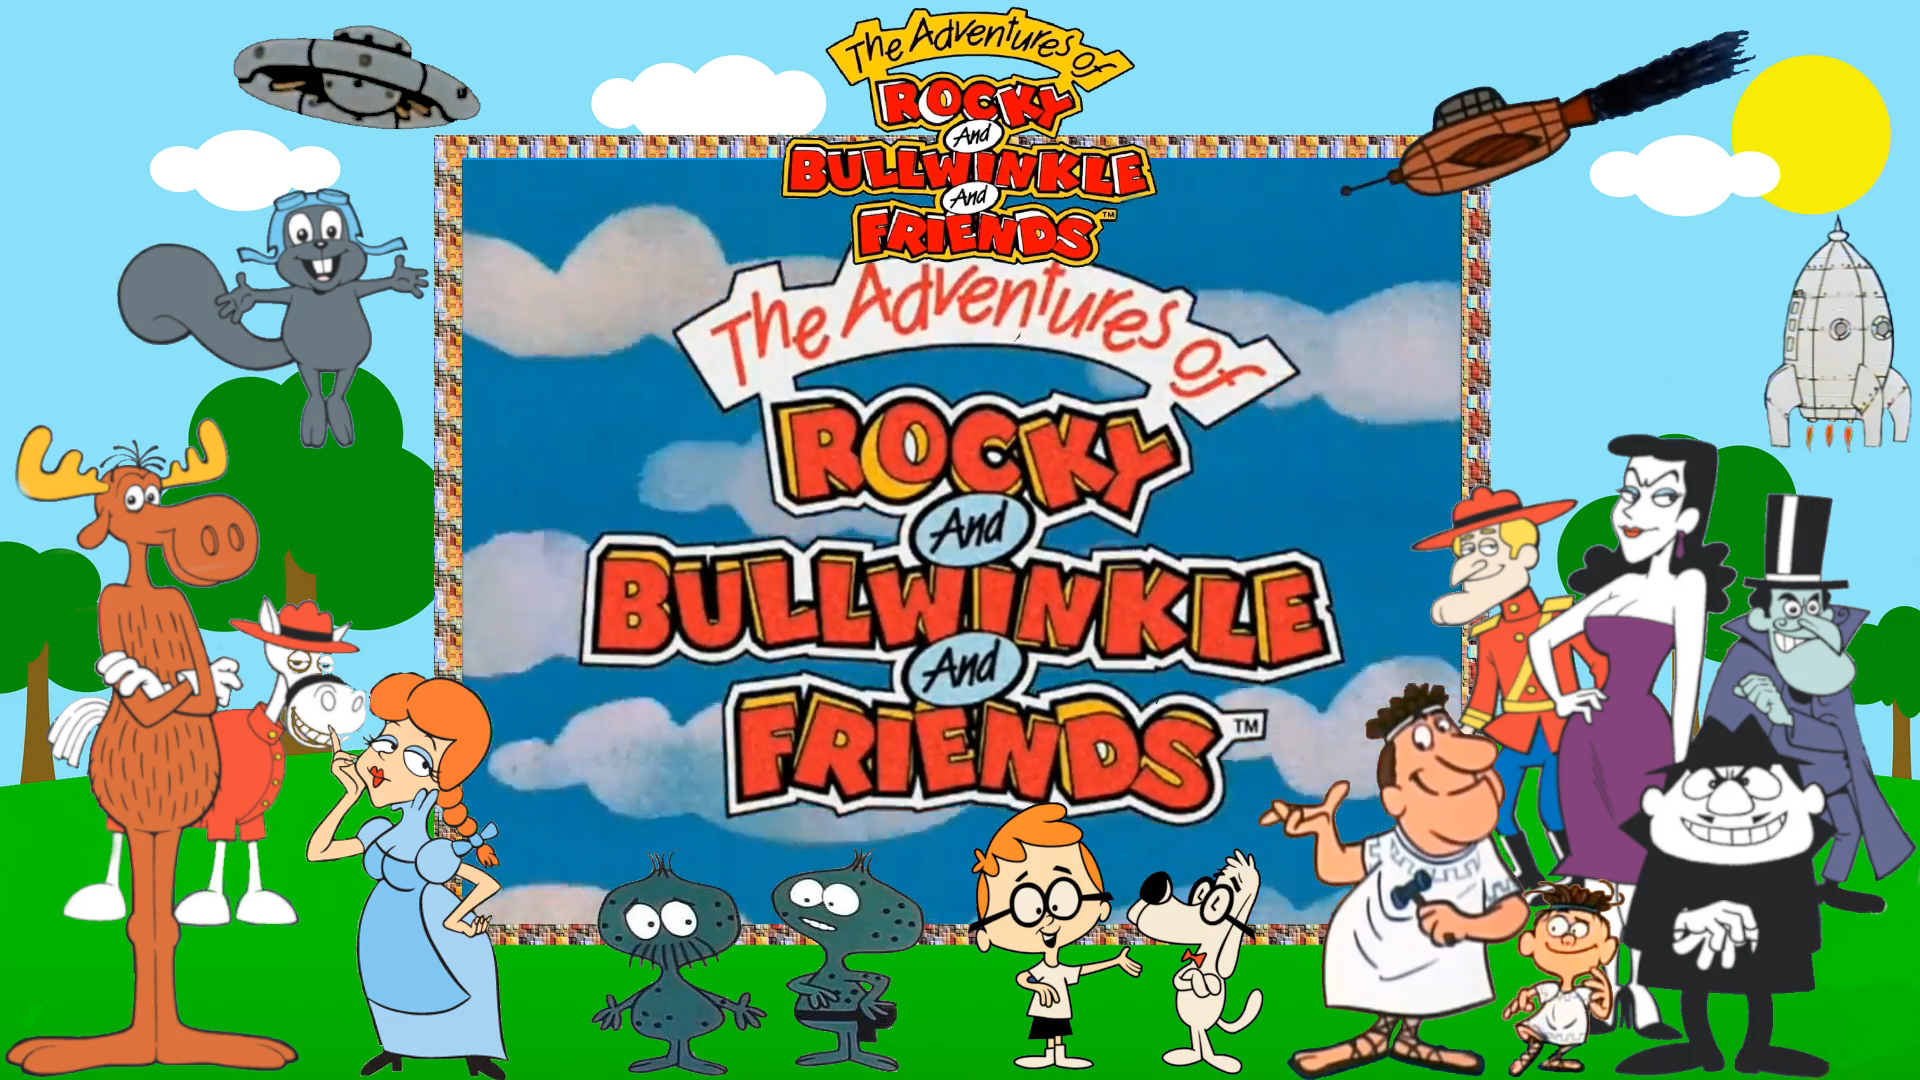 Adventures of Rocky and Bullwinkle The, Pup Pack